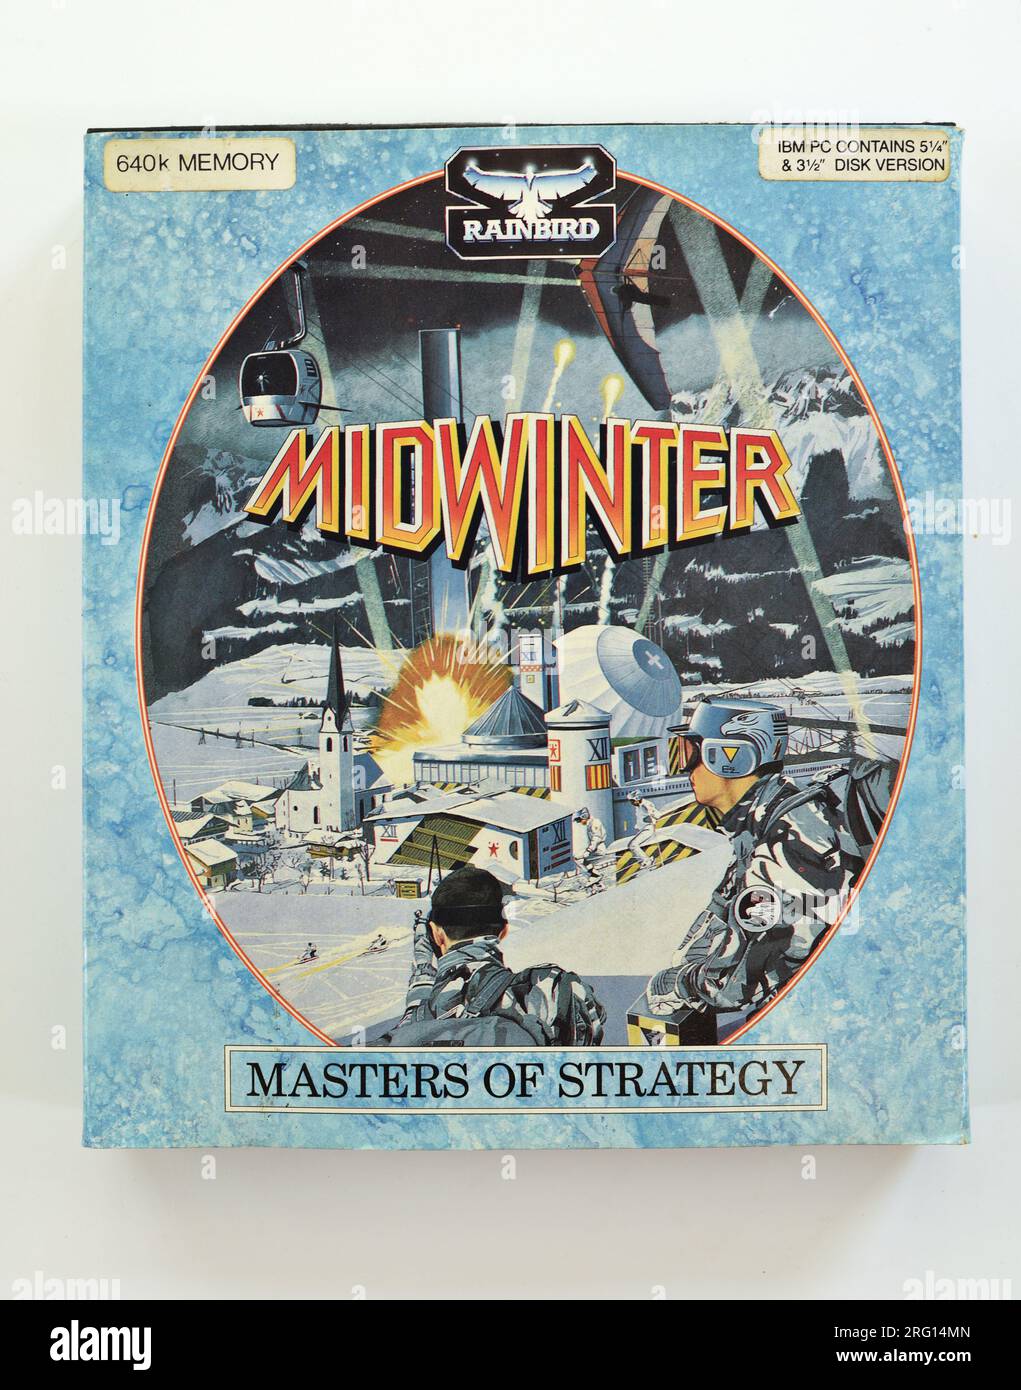 1989 MS-DOS computer game Midwinter Masters of Strategy computer game by Rainbird, box art, front slip cover Stock Photo